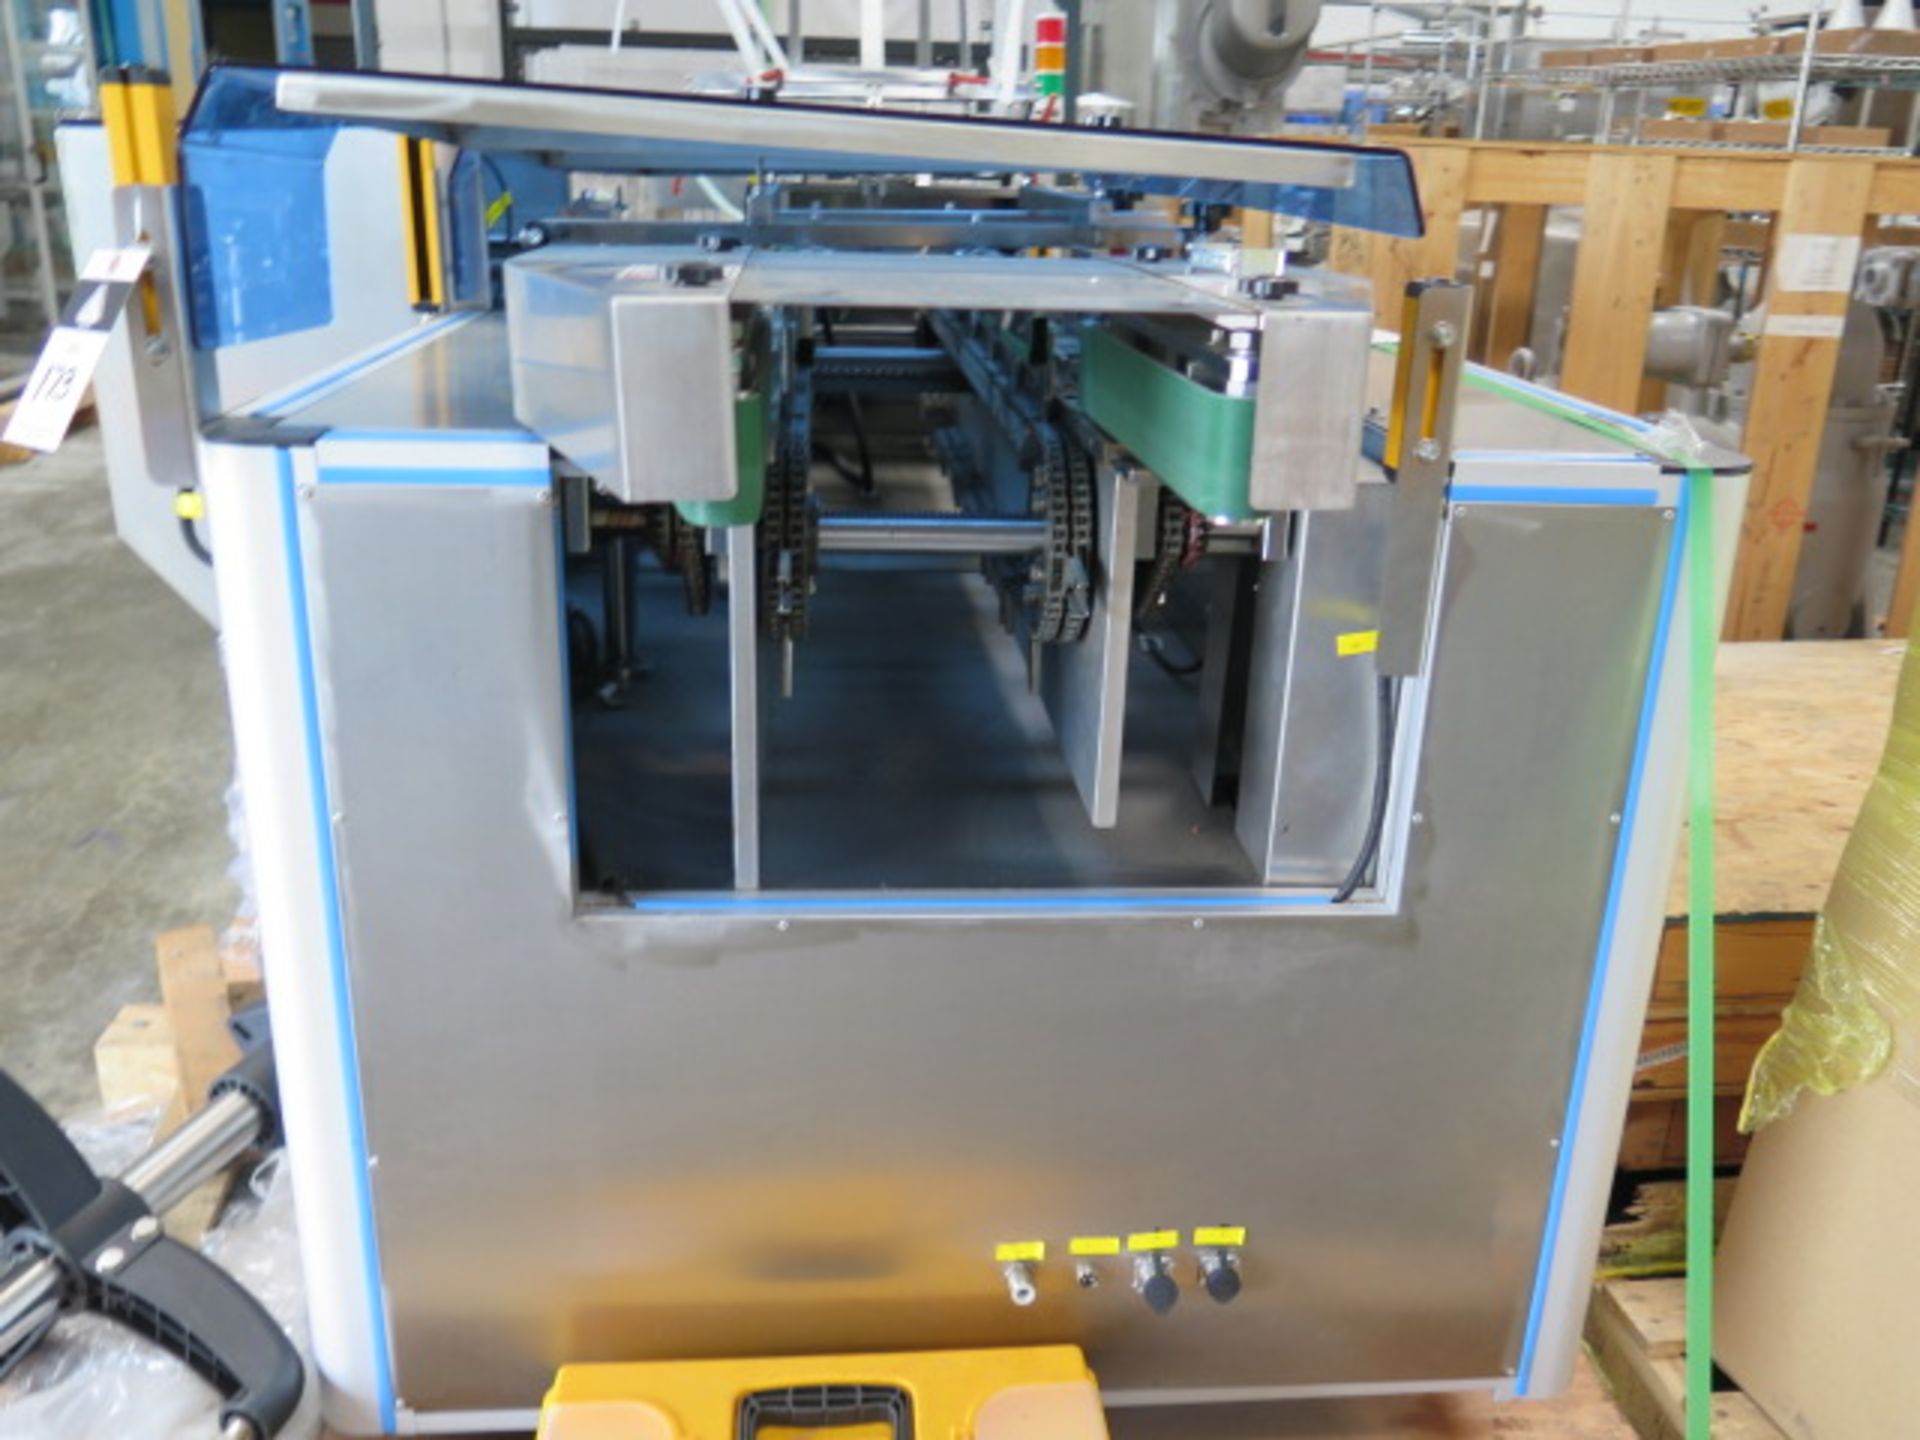 2022(NEW) Rongyu RY-ZH-80 Packaging Machine s/n220302 w/Siemens Smart Line Touch Controls,SOLD AS IS - Image 3 of 48